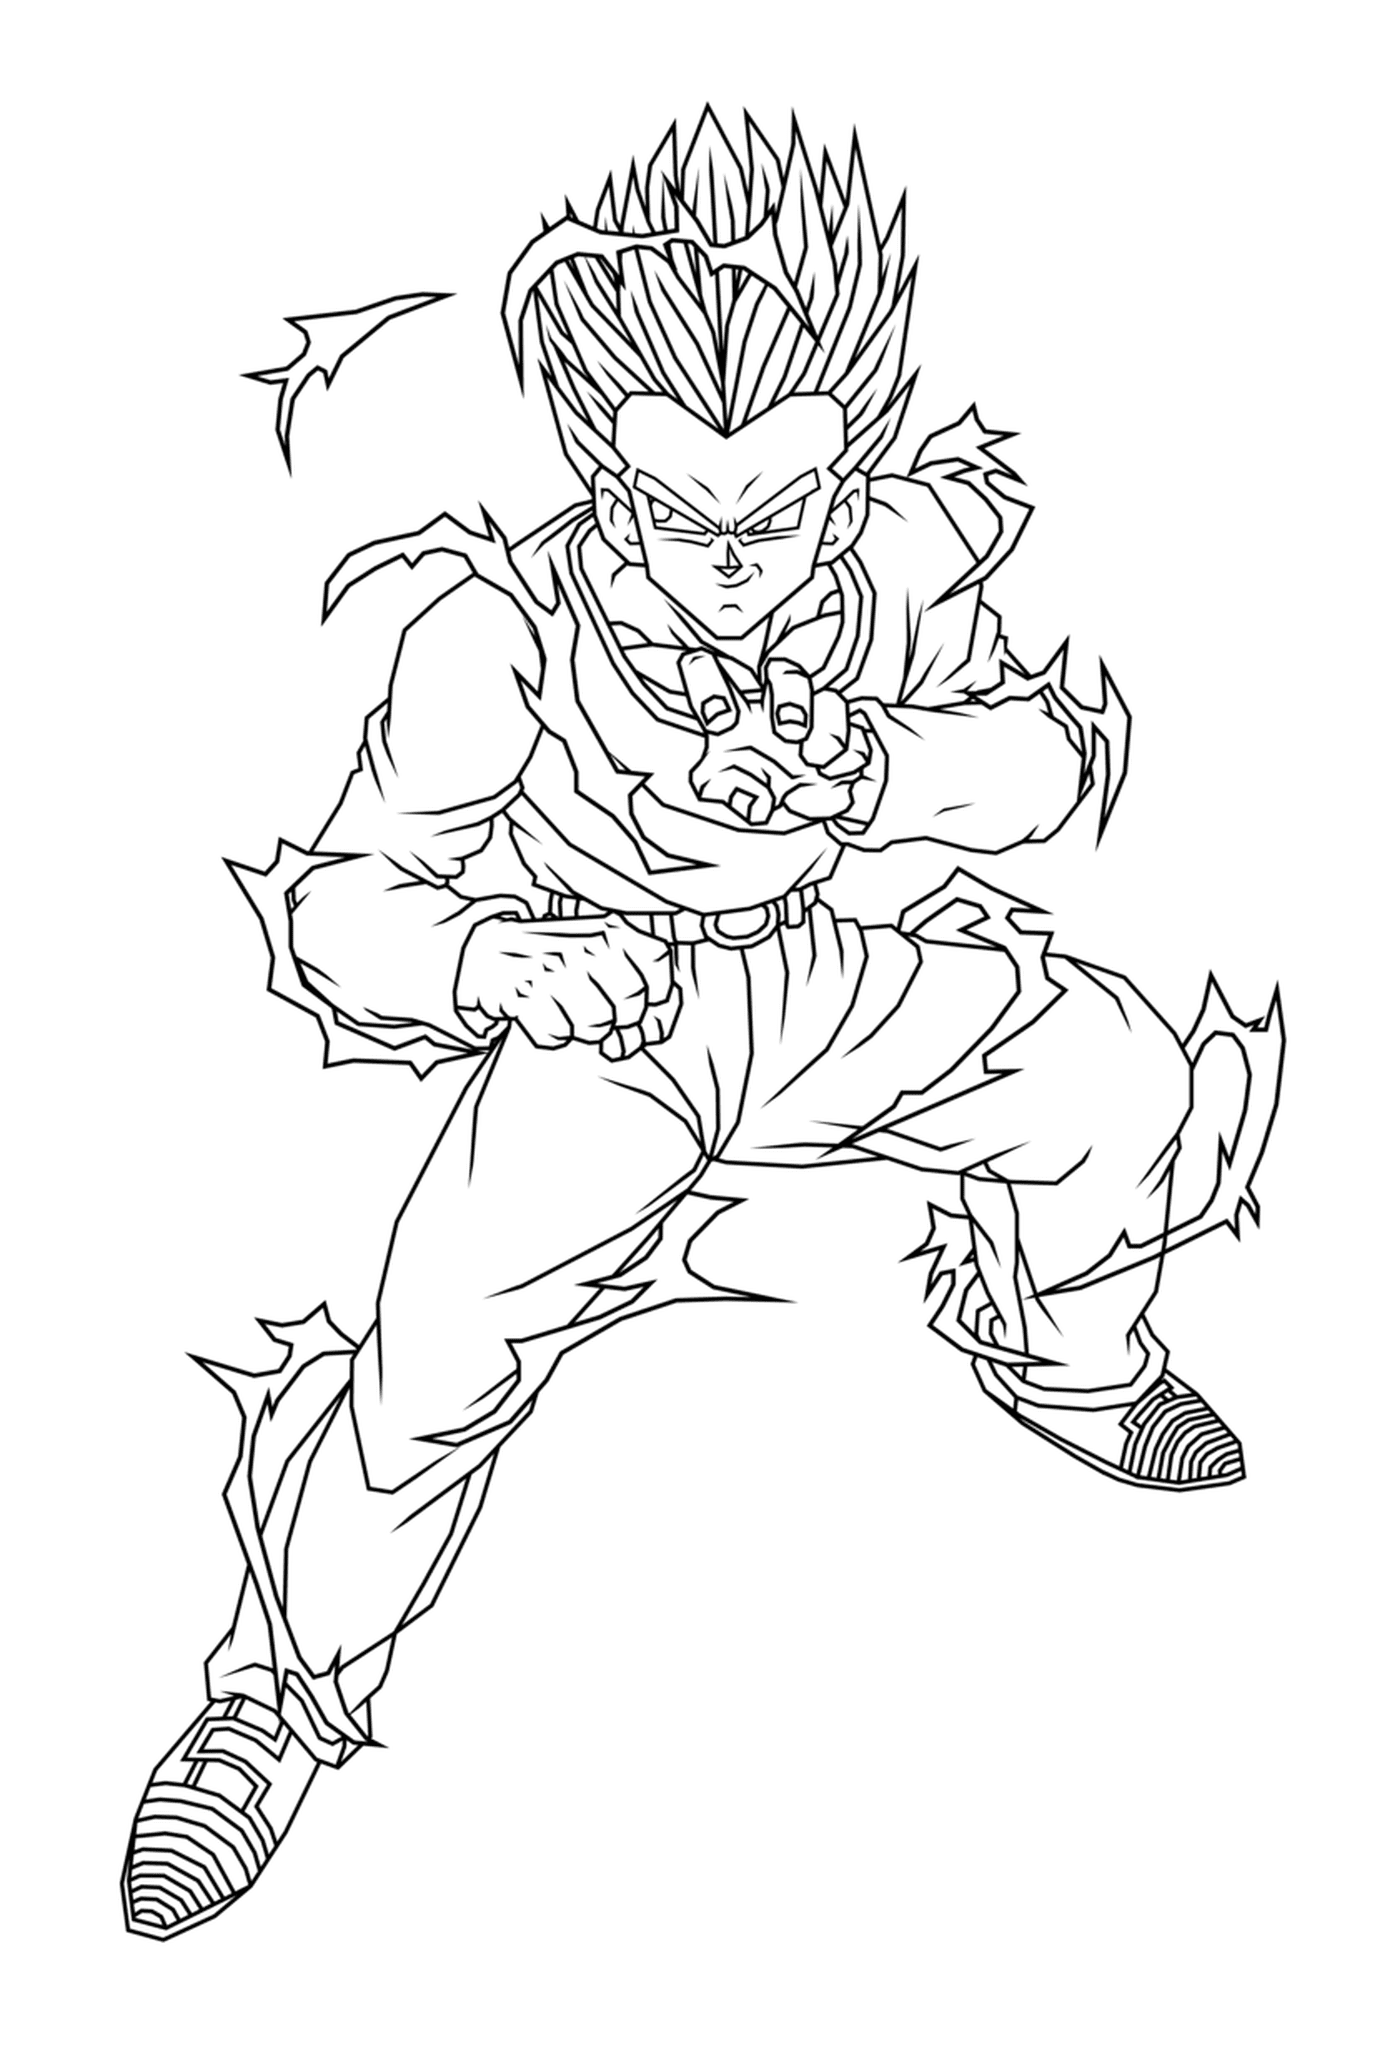  Yamcha, a character from Dragon Ball Z 